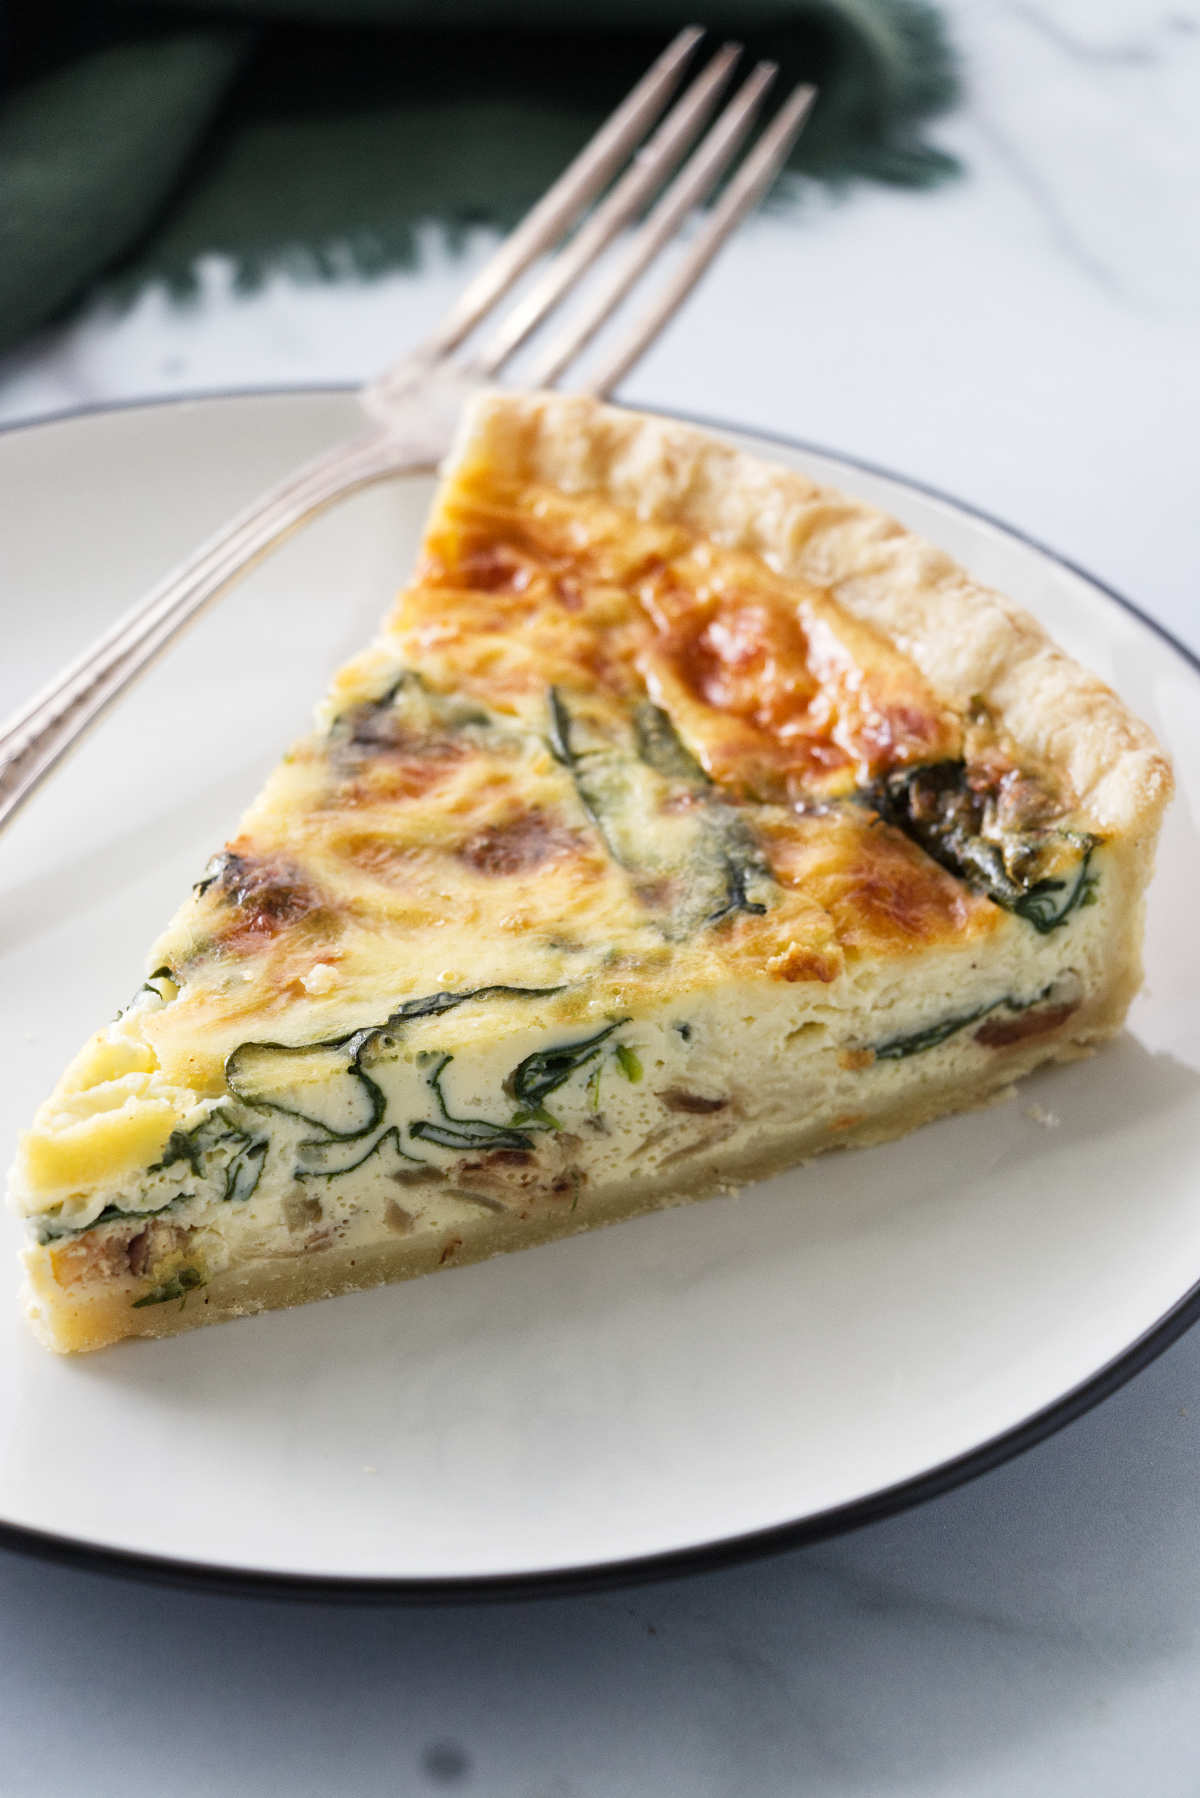 A slice of quiche with spinach baked into the center of the quiche.